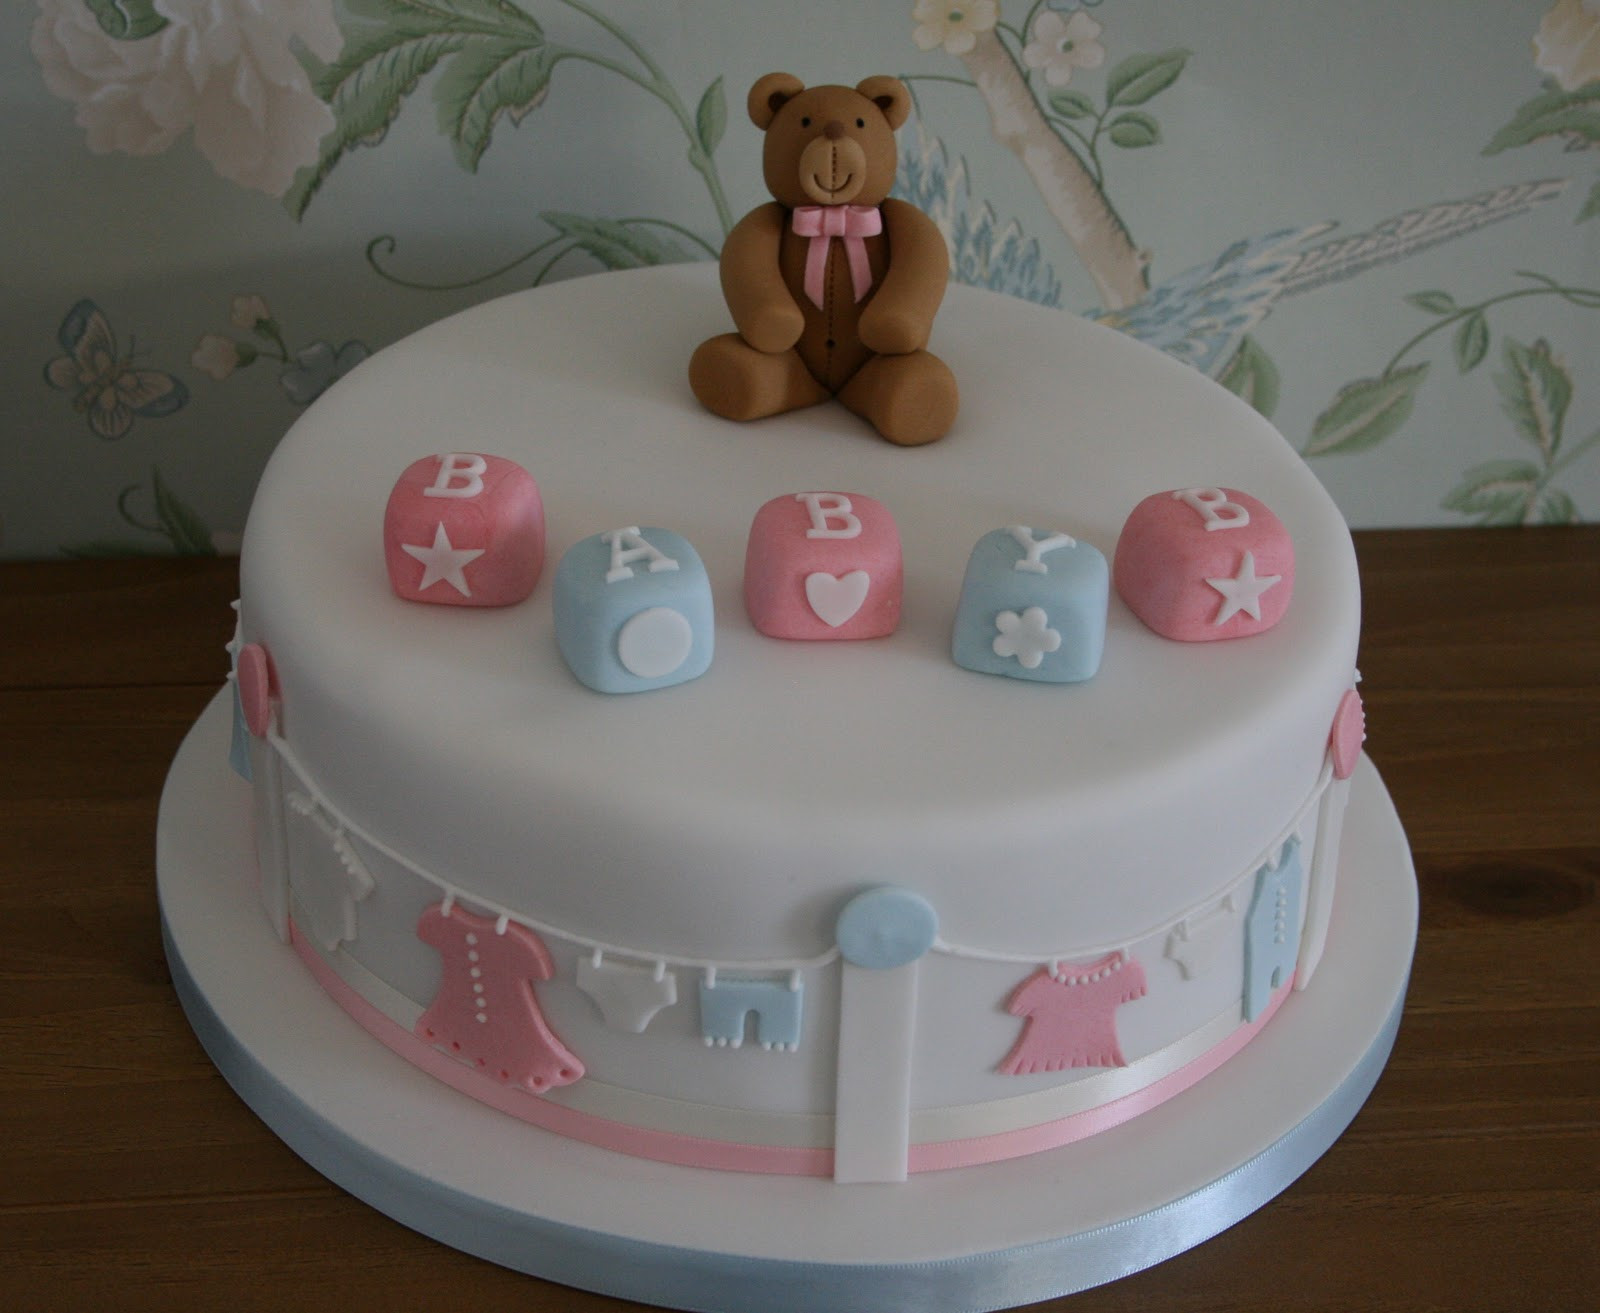 Baby Shower Cake Decoration Ideas
 70 Baby Shower Cakes and Cupcakes Ideas